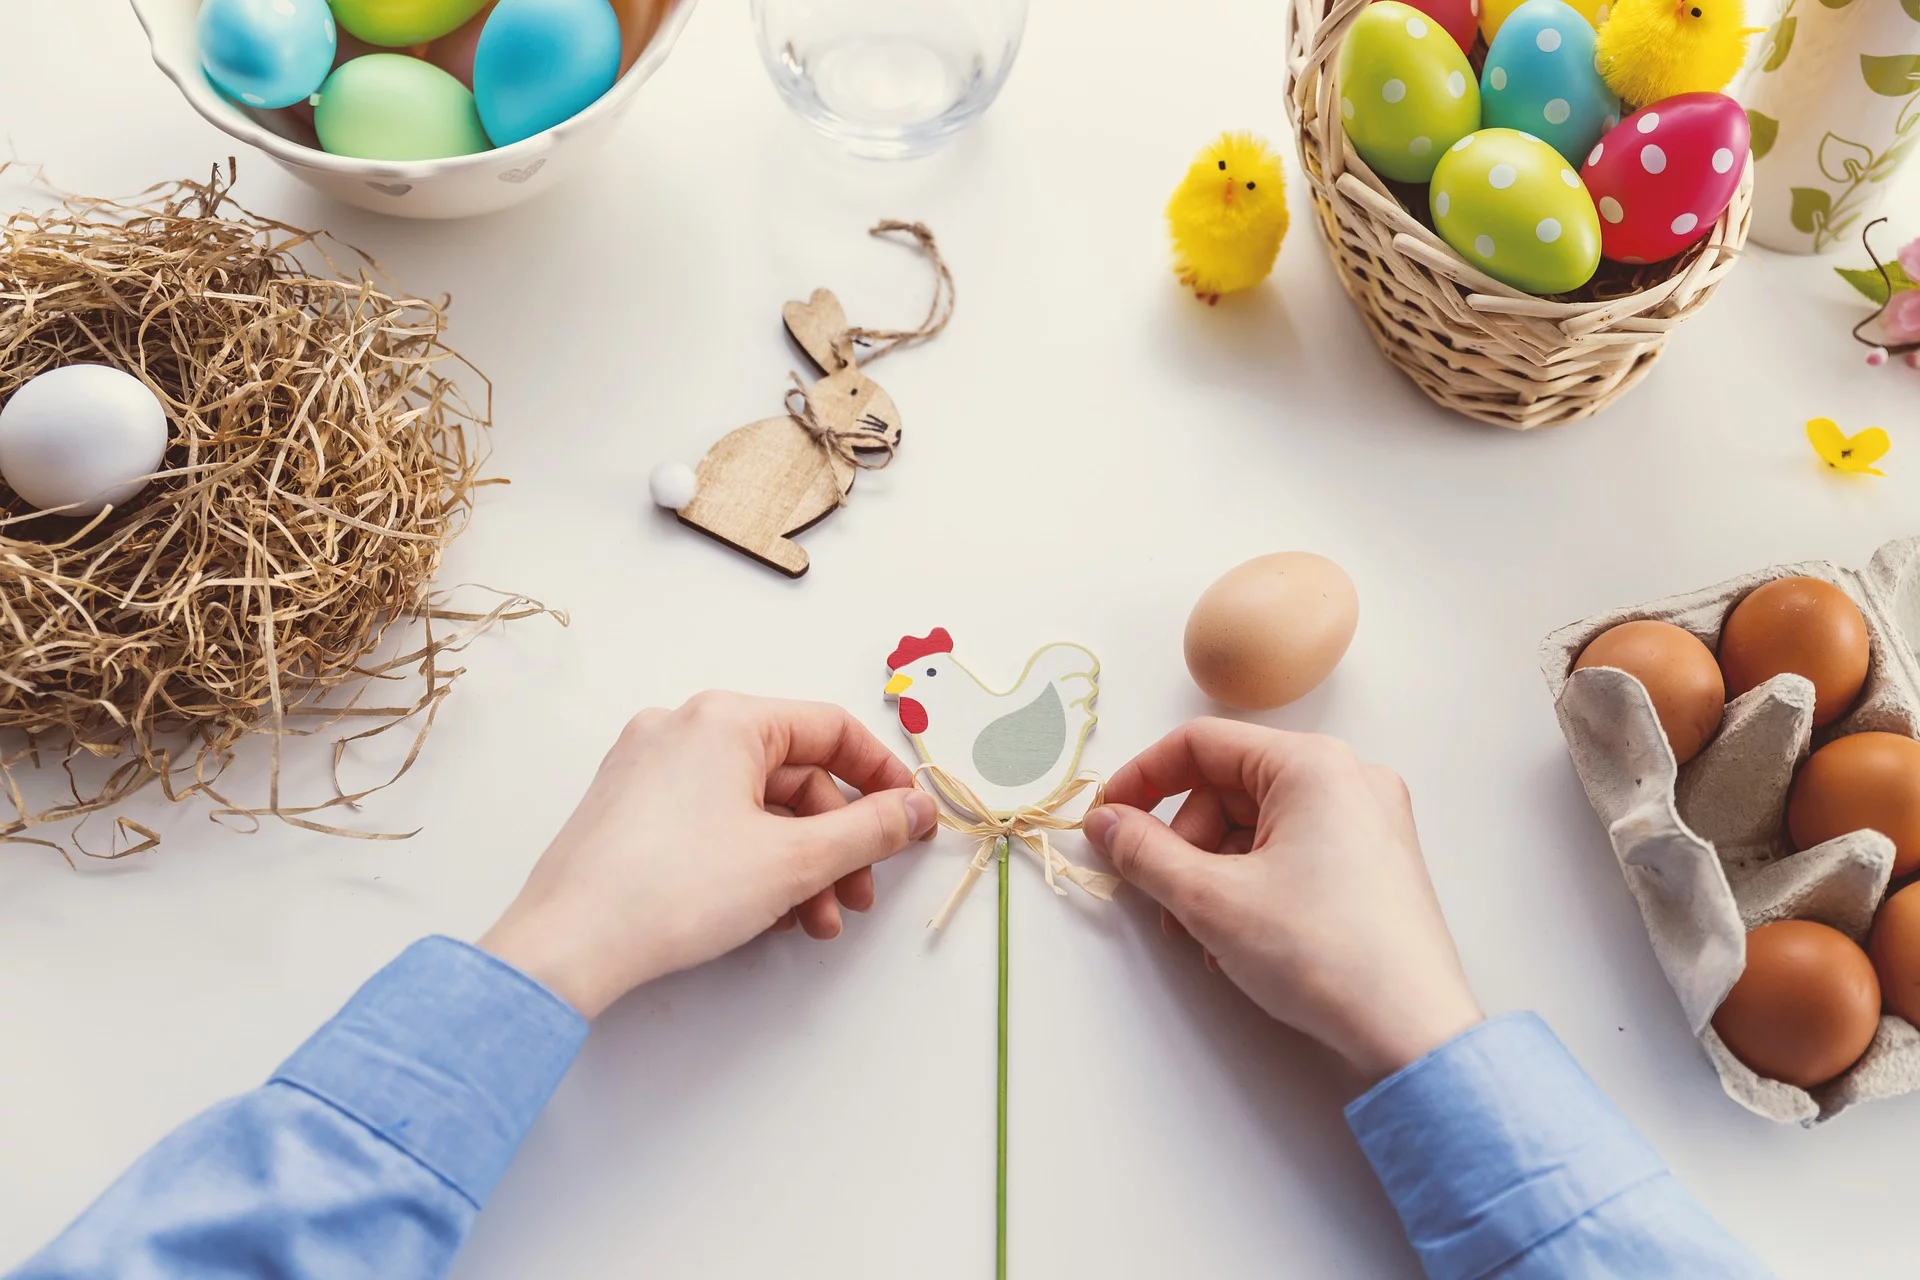 9 Easy and Budget-Friendly Easter Decoration Ideas